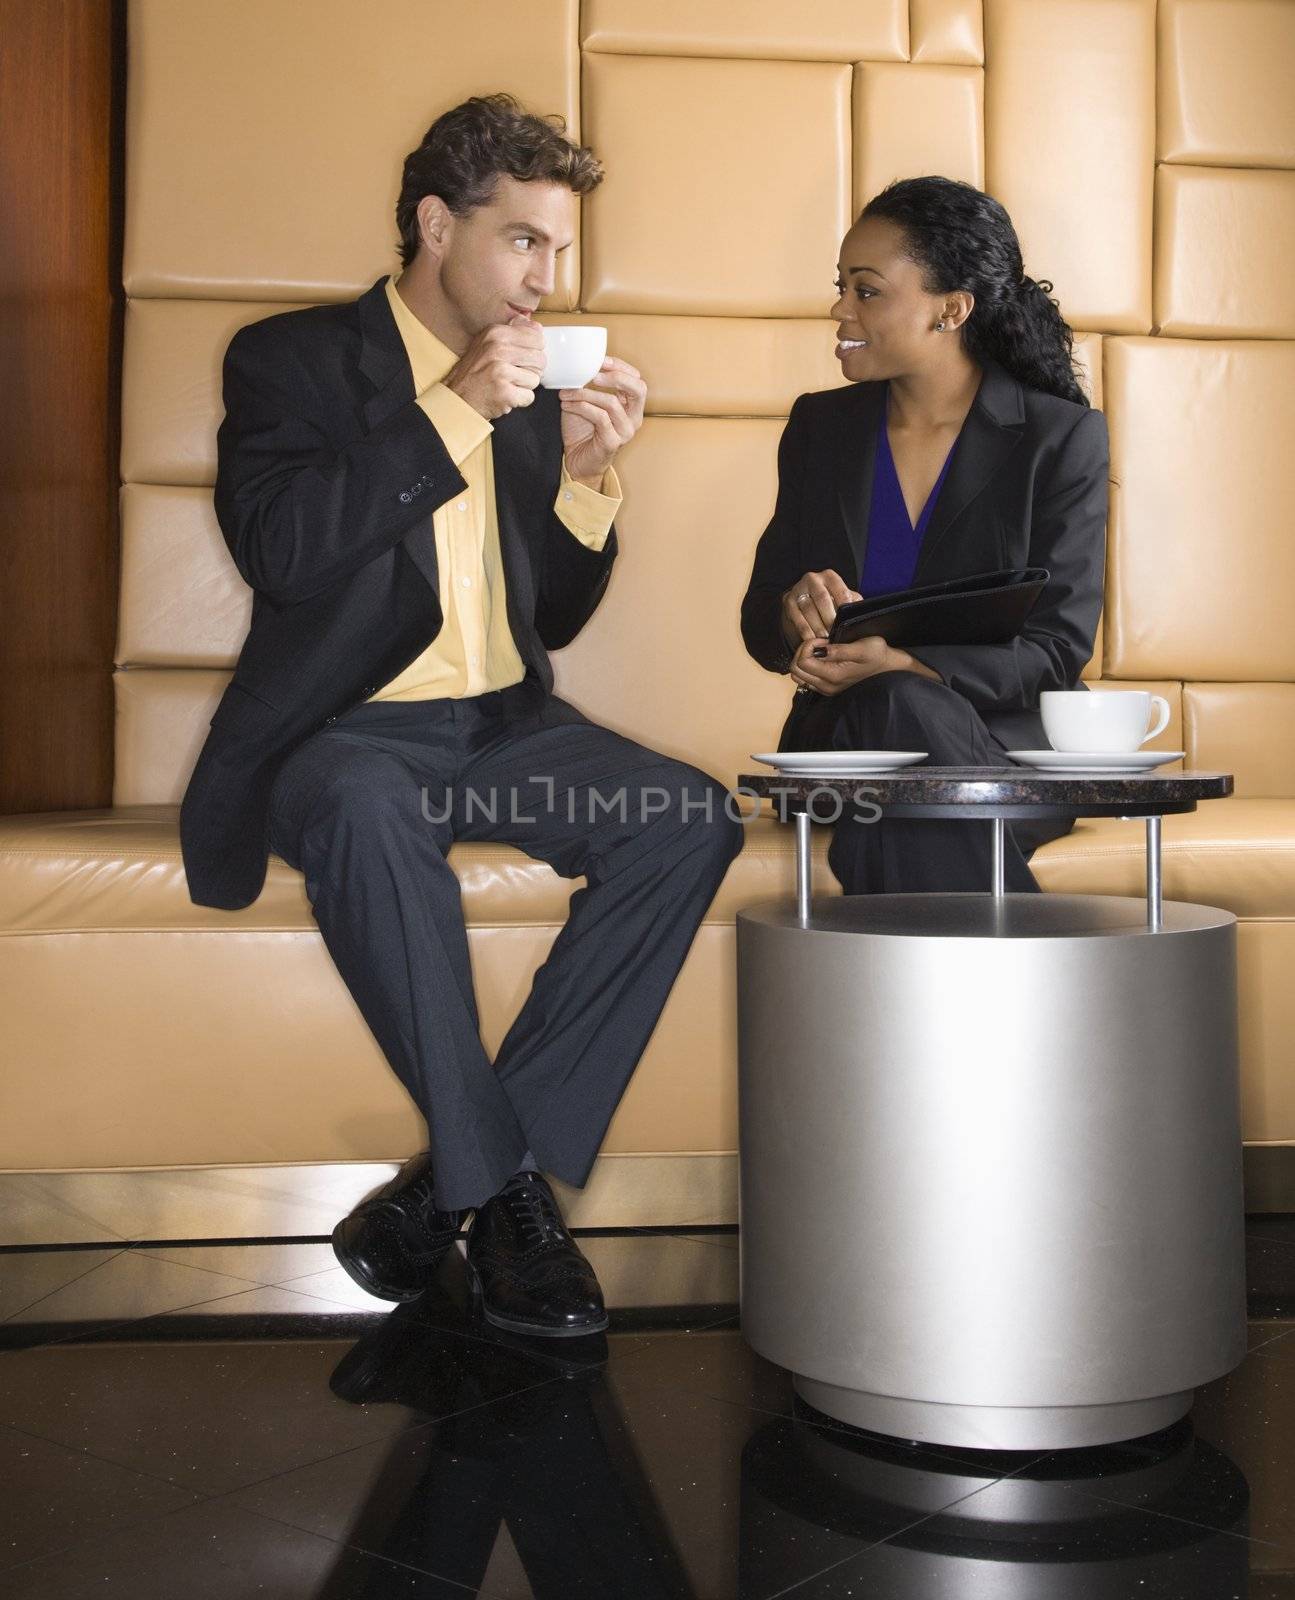 Caucasian businessman and African Amerian woman drinking coffee.